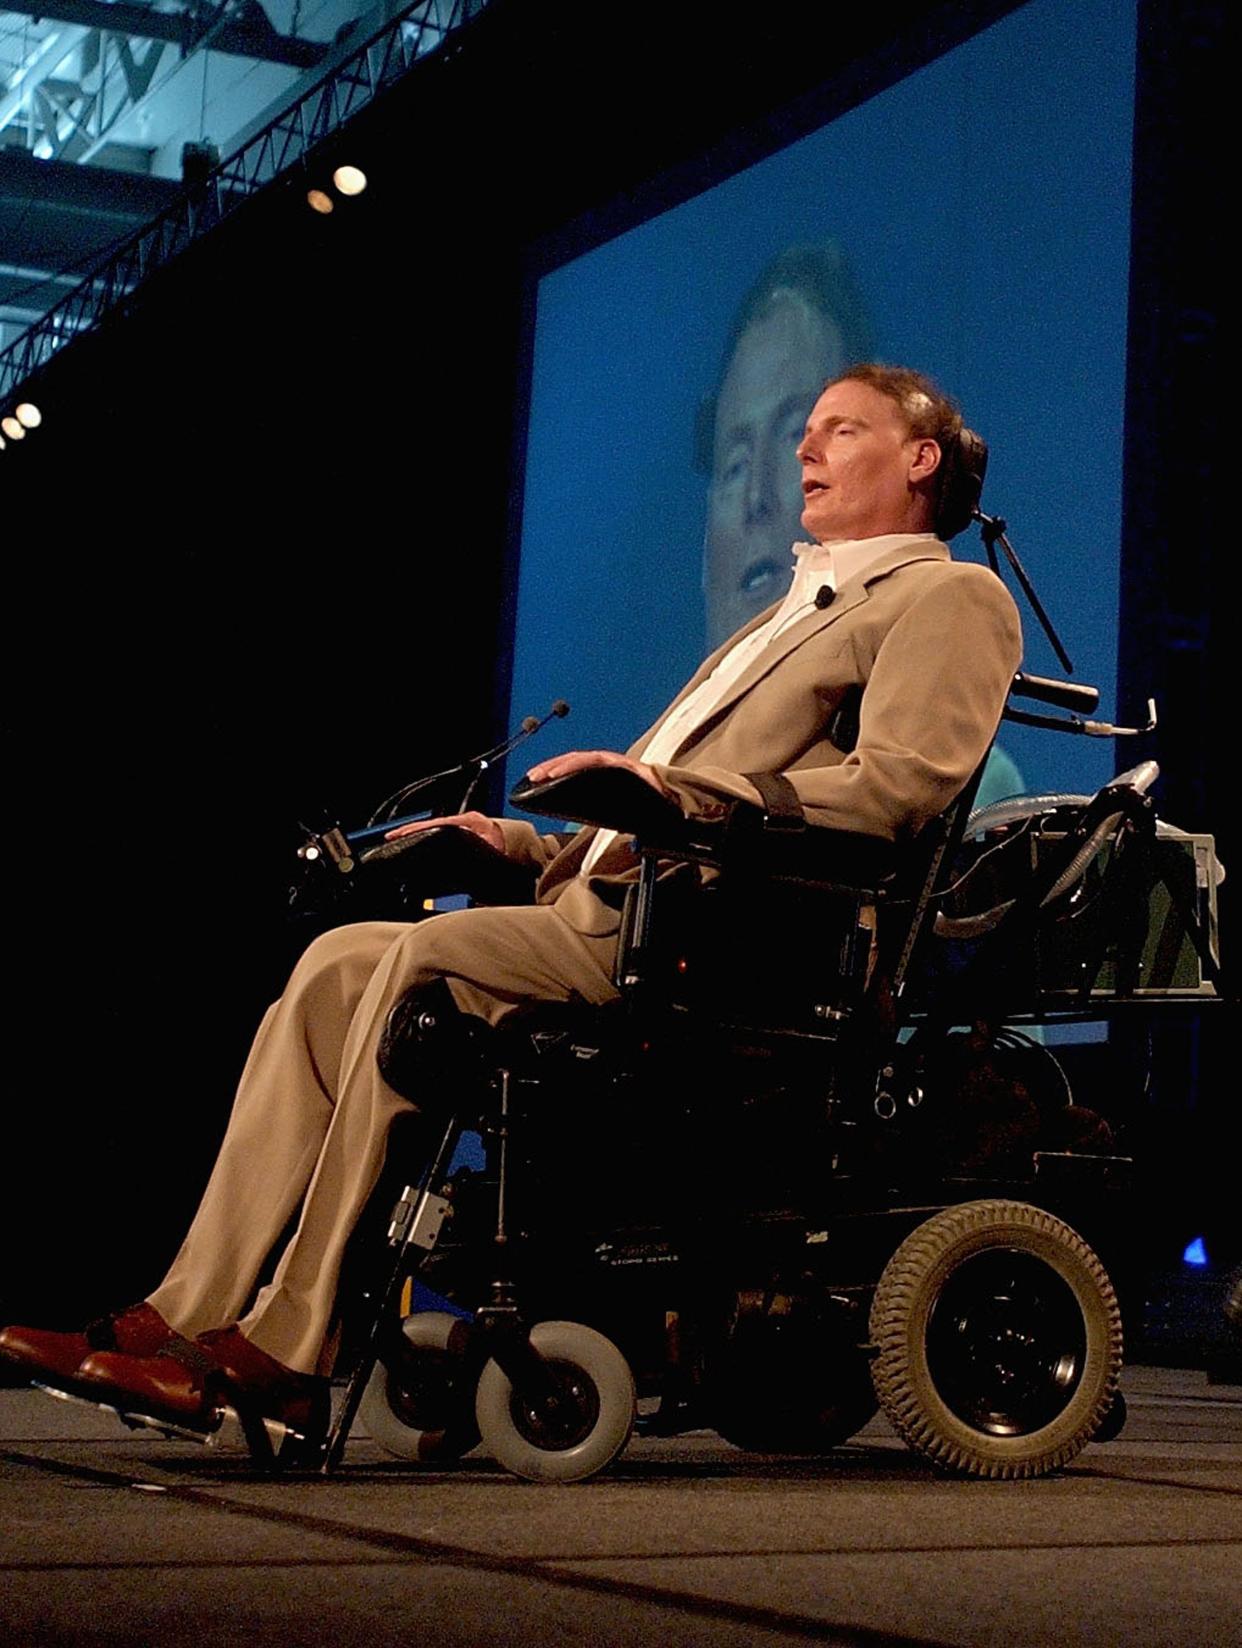 Actor Christopher Reeve speaks at the Making Connections Forum on Spinal Cord injury and Conditions, January 27, 2003 at the Sydney Convention Centre in Sydney, Australia.